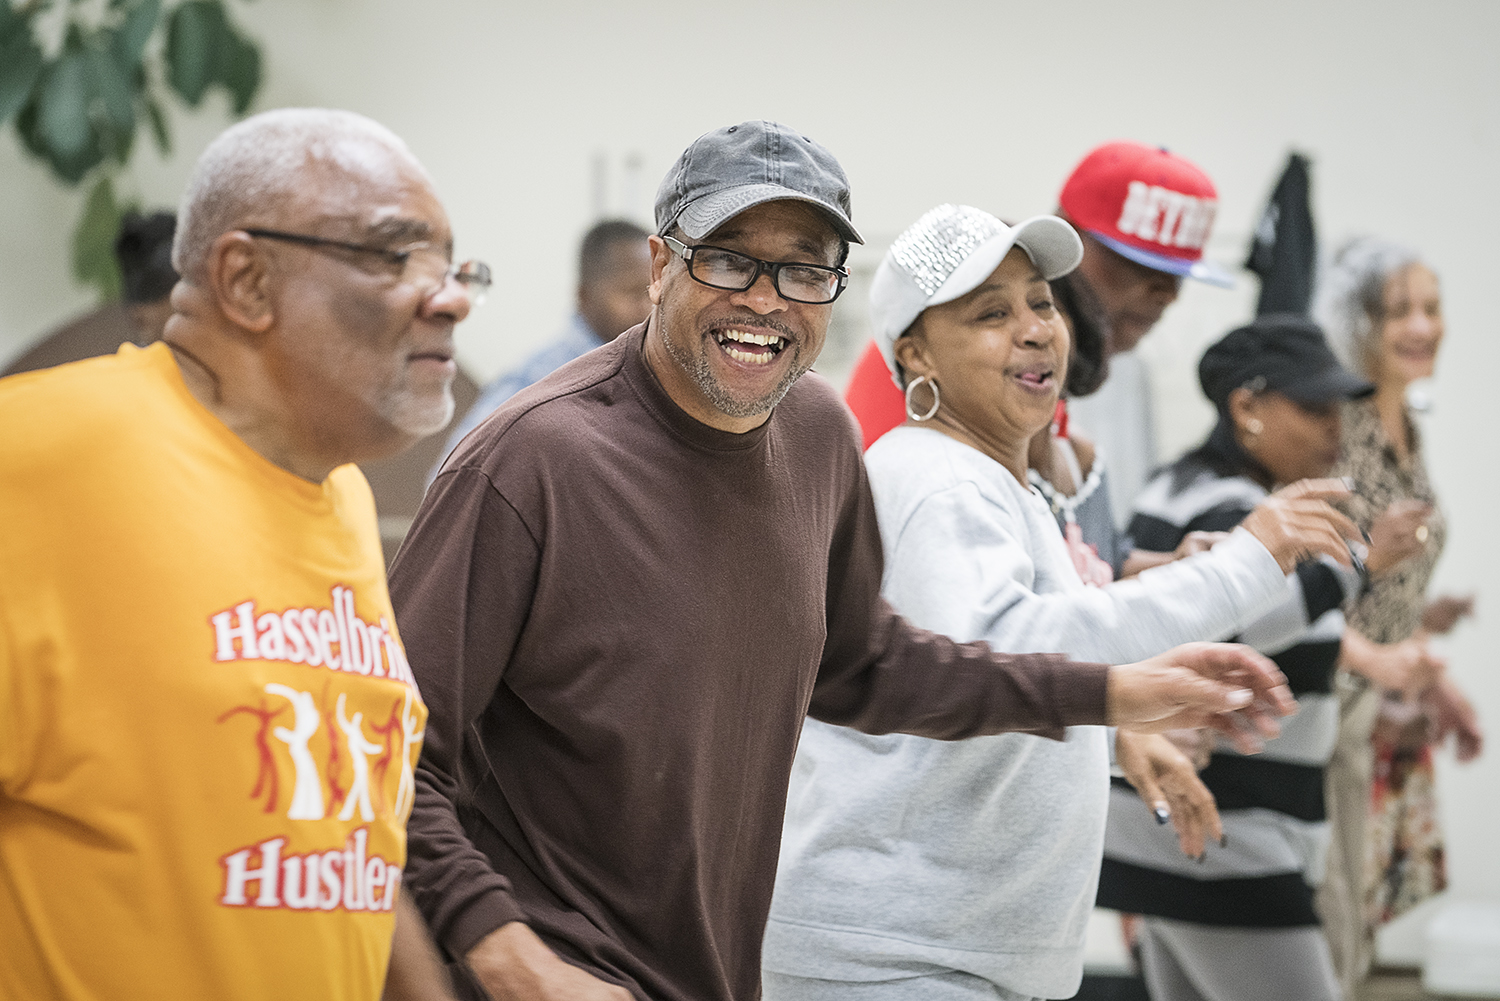 Gardell Haralson, 64 (center left) laughs as he dances with the Hasselbring Hustlers at the Hasselbring Senior Community Center. Haralson helped grow the Hustlers from a meager 15 participants to approximately 150 over the past four years.